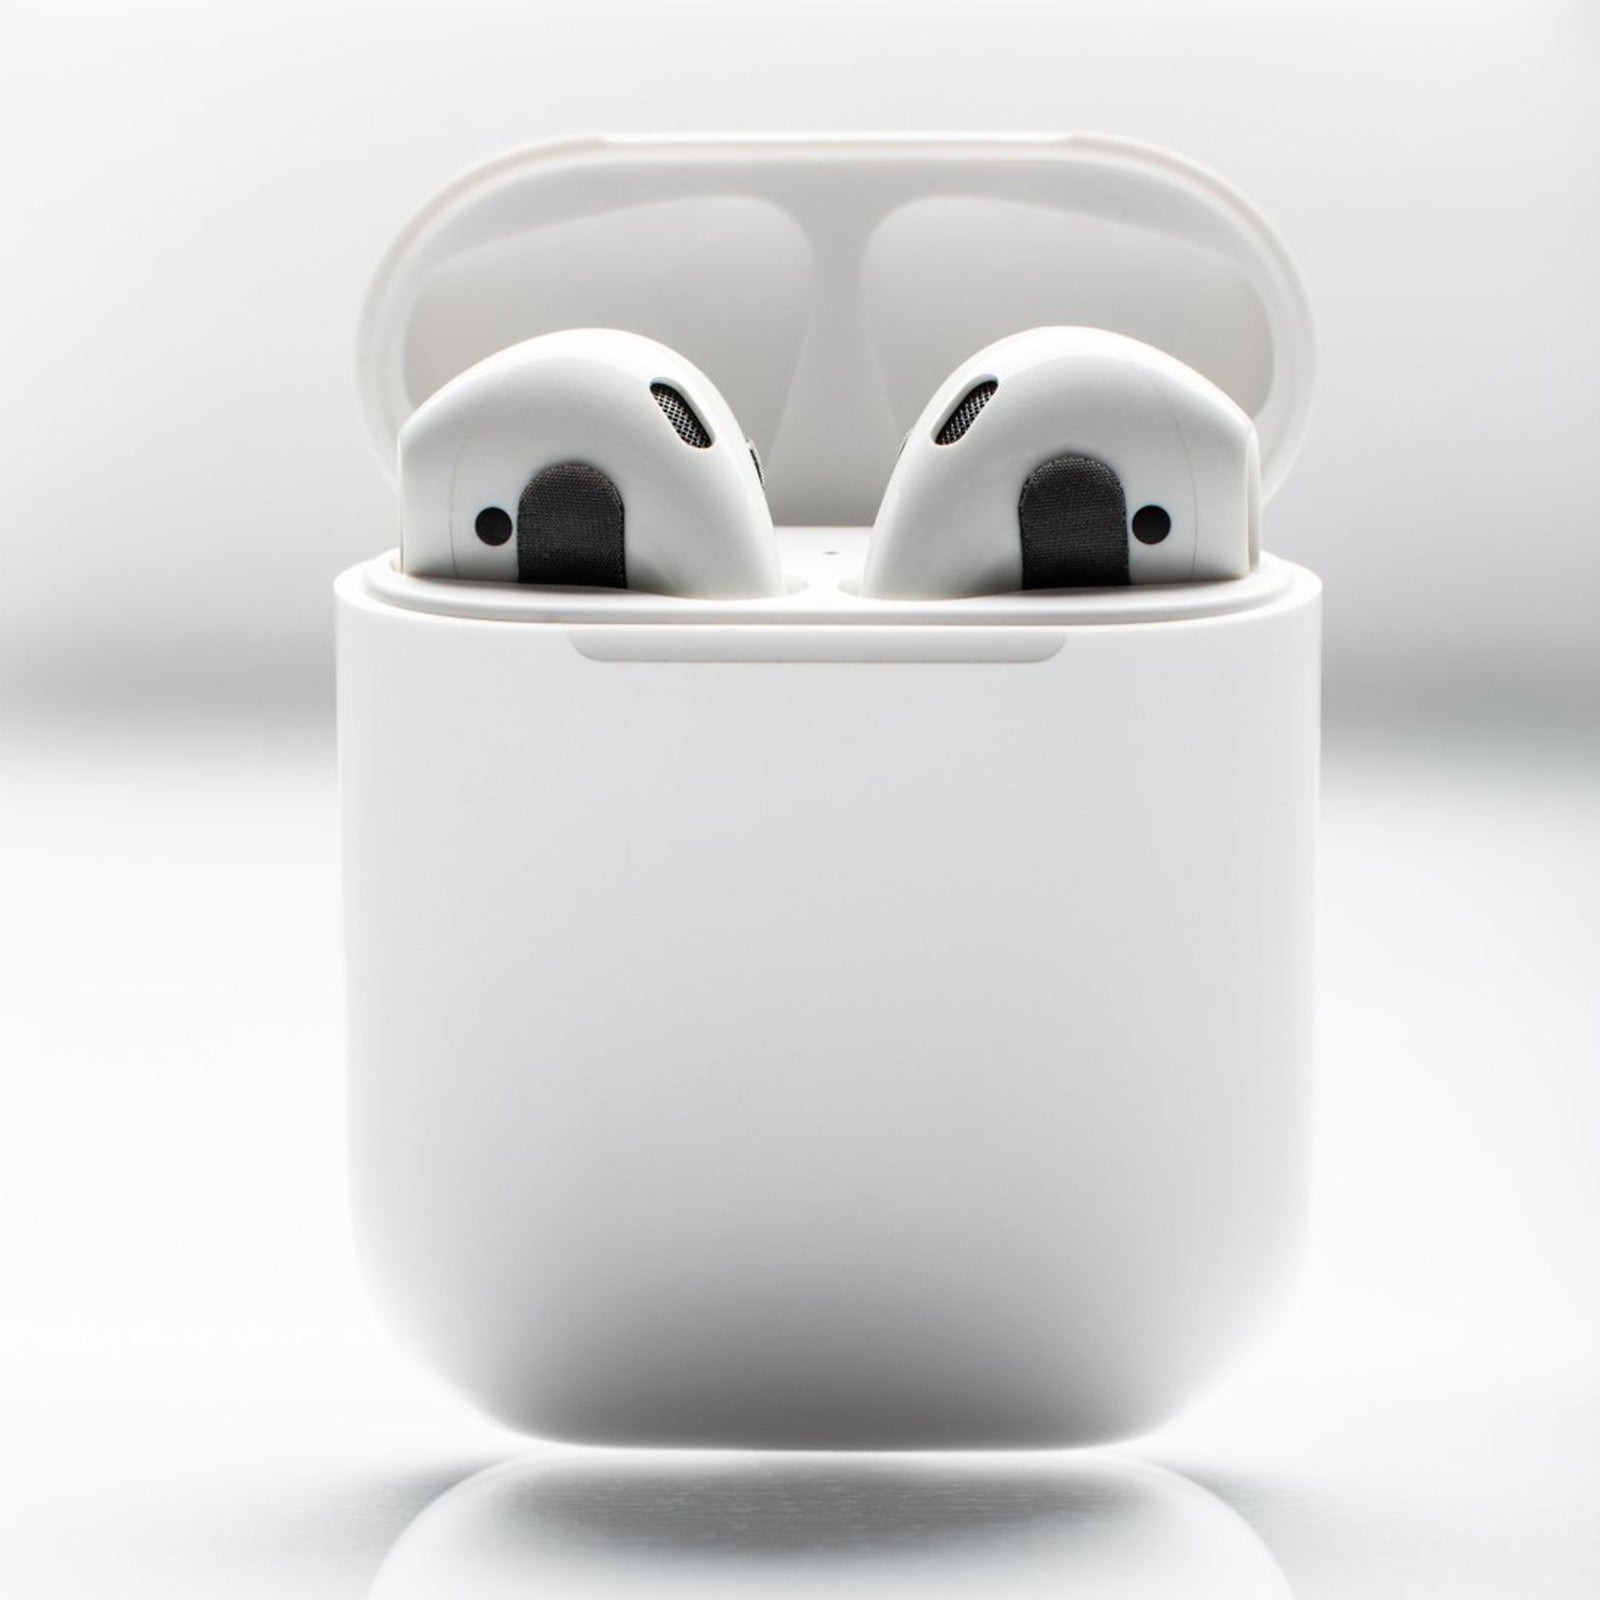 Setex Earbud Grips - for Apple AirPods Pro